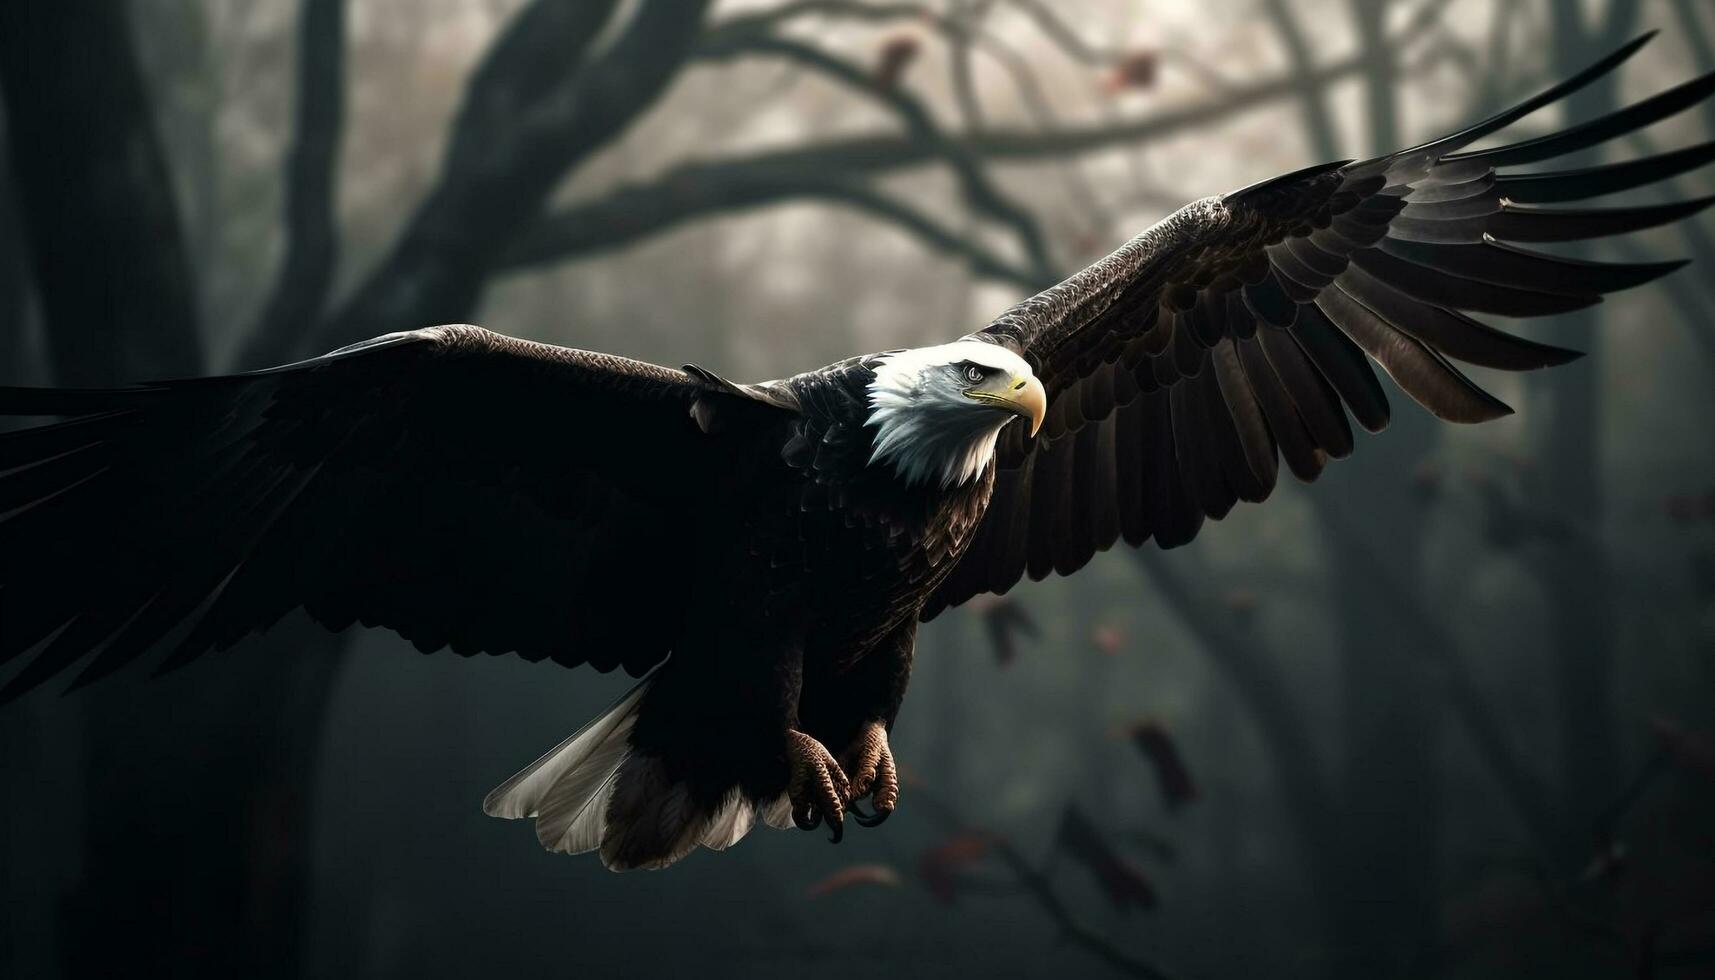 Spread wings of majestic bald eagle flying generated by AI photo